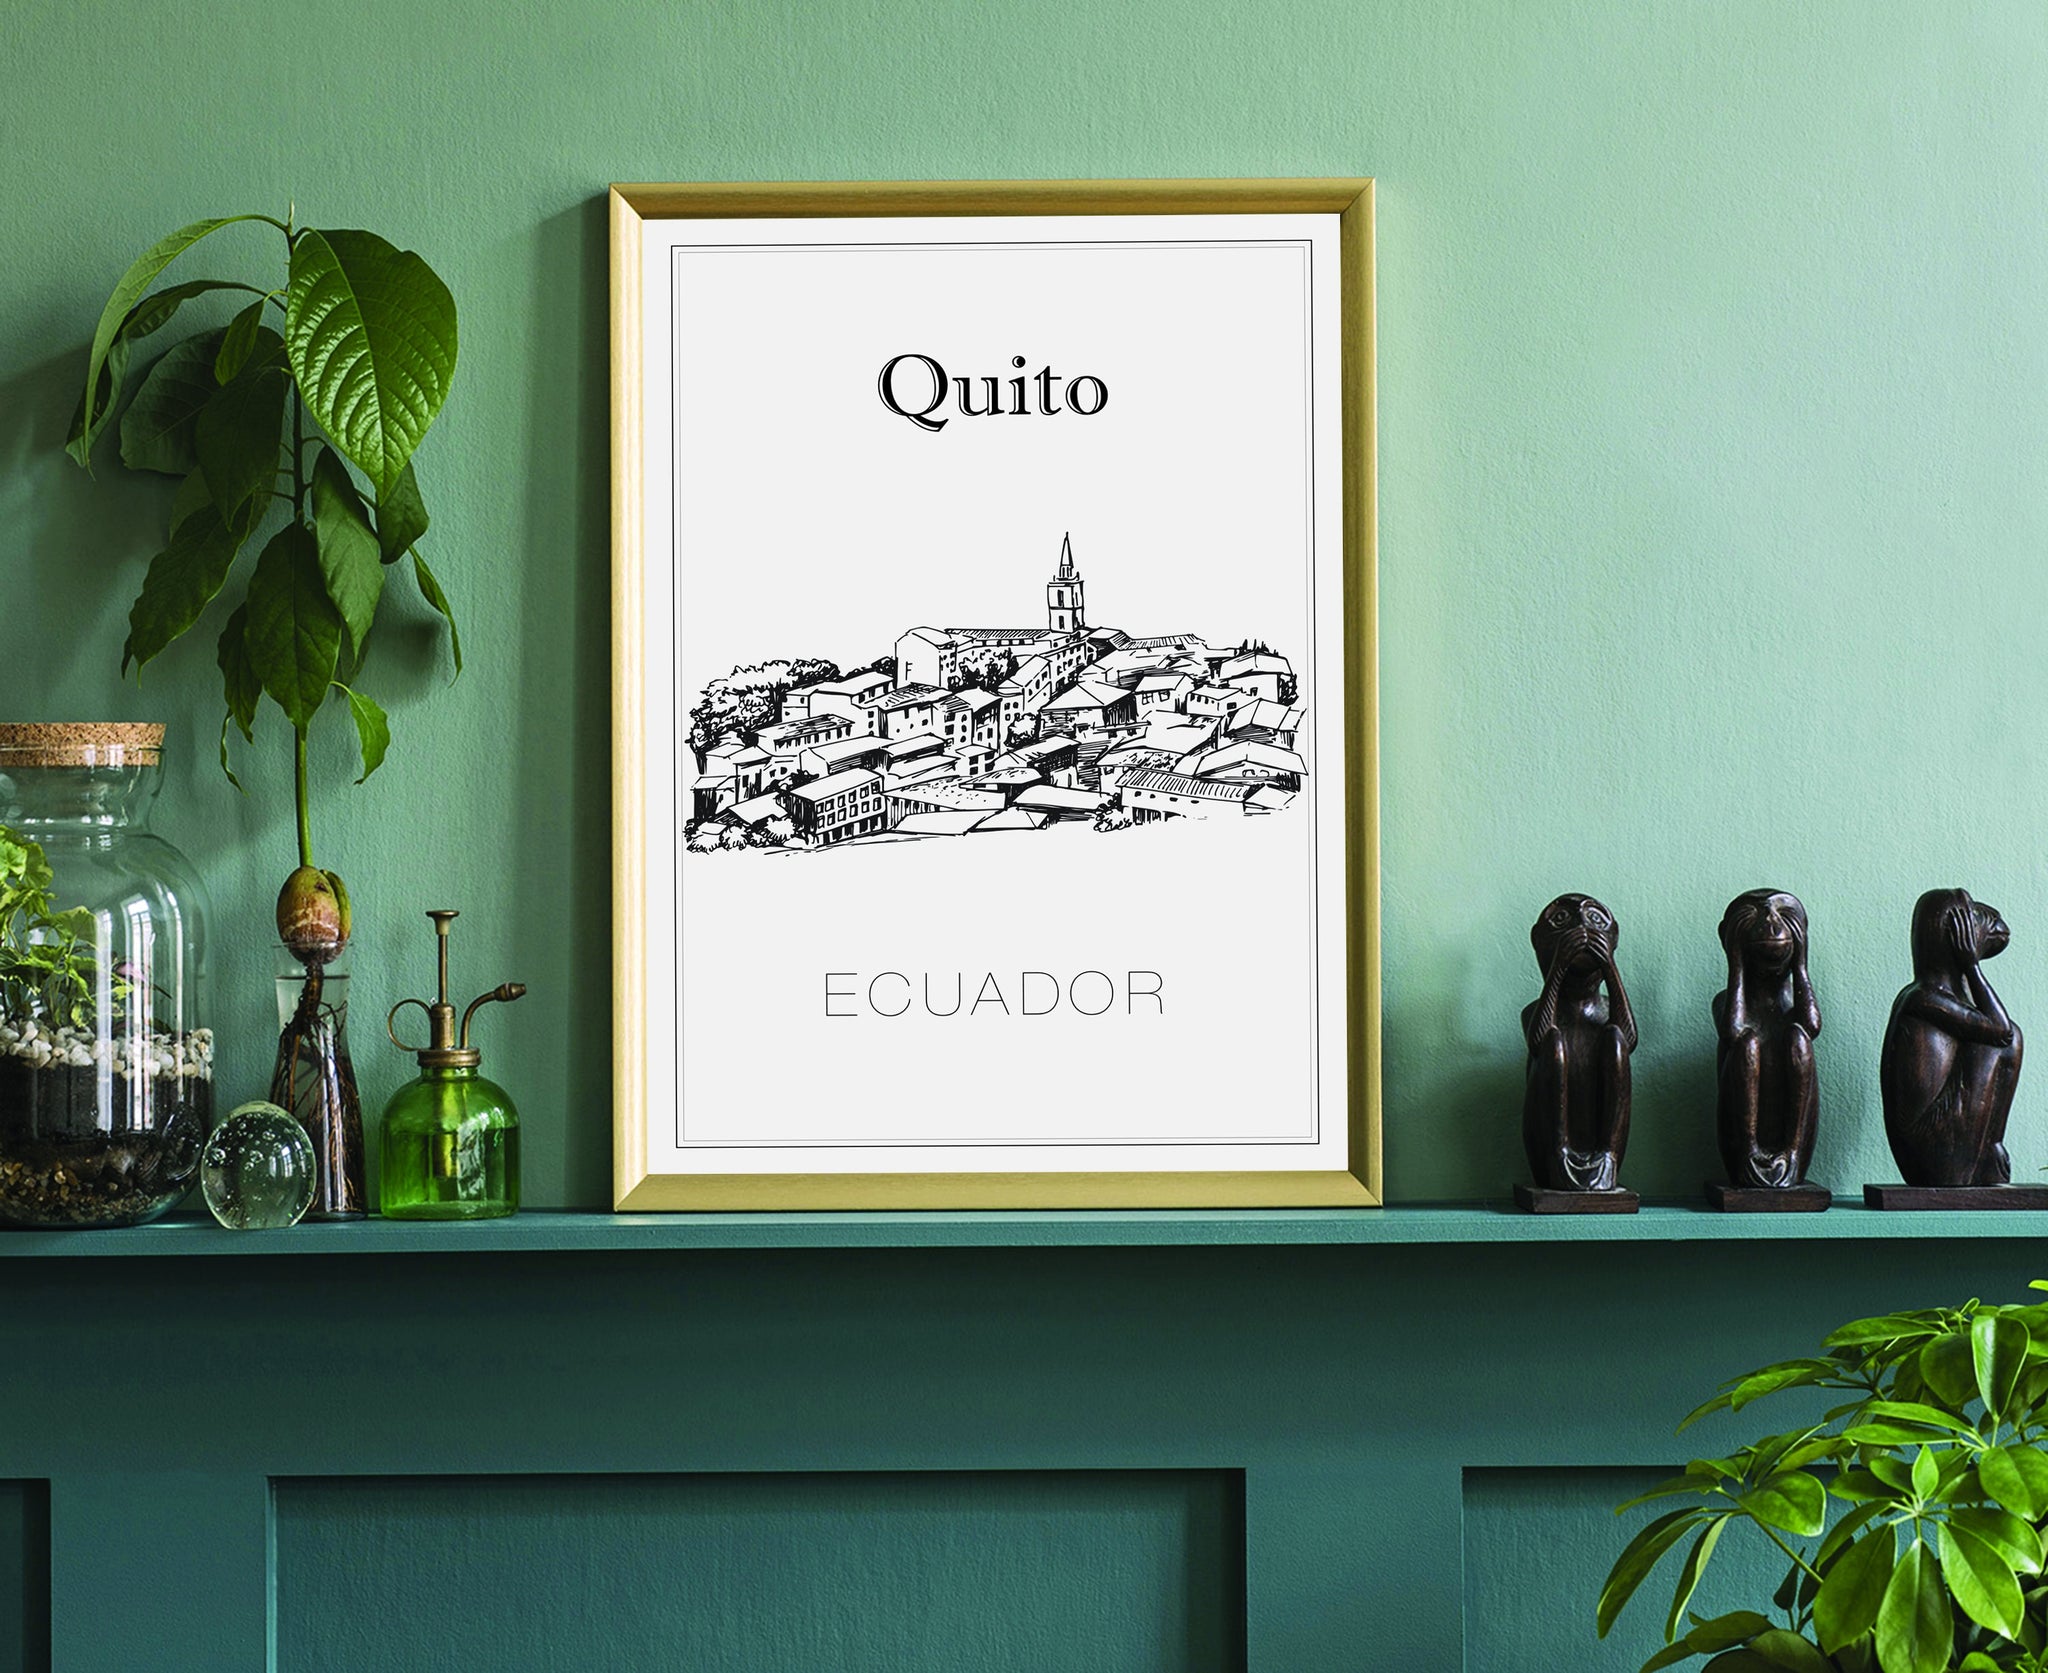 Hand Drawn Poster, Quito Travel Poster, Ecuador Poster Wall Art, Quito Cityscape and Landmark Map, City Map Poster for Home Office